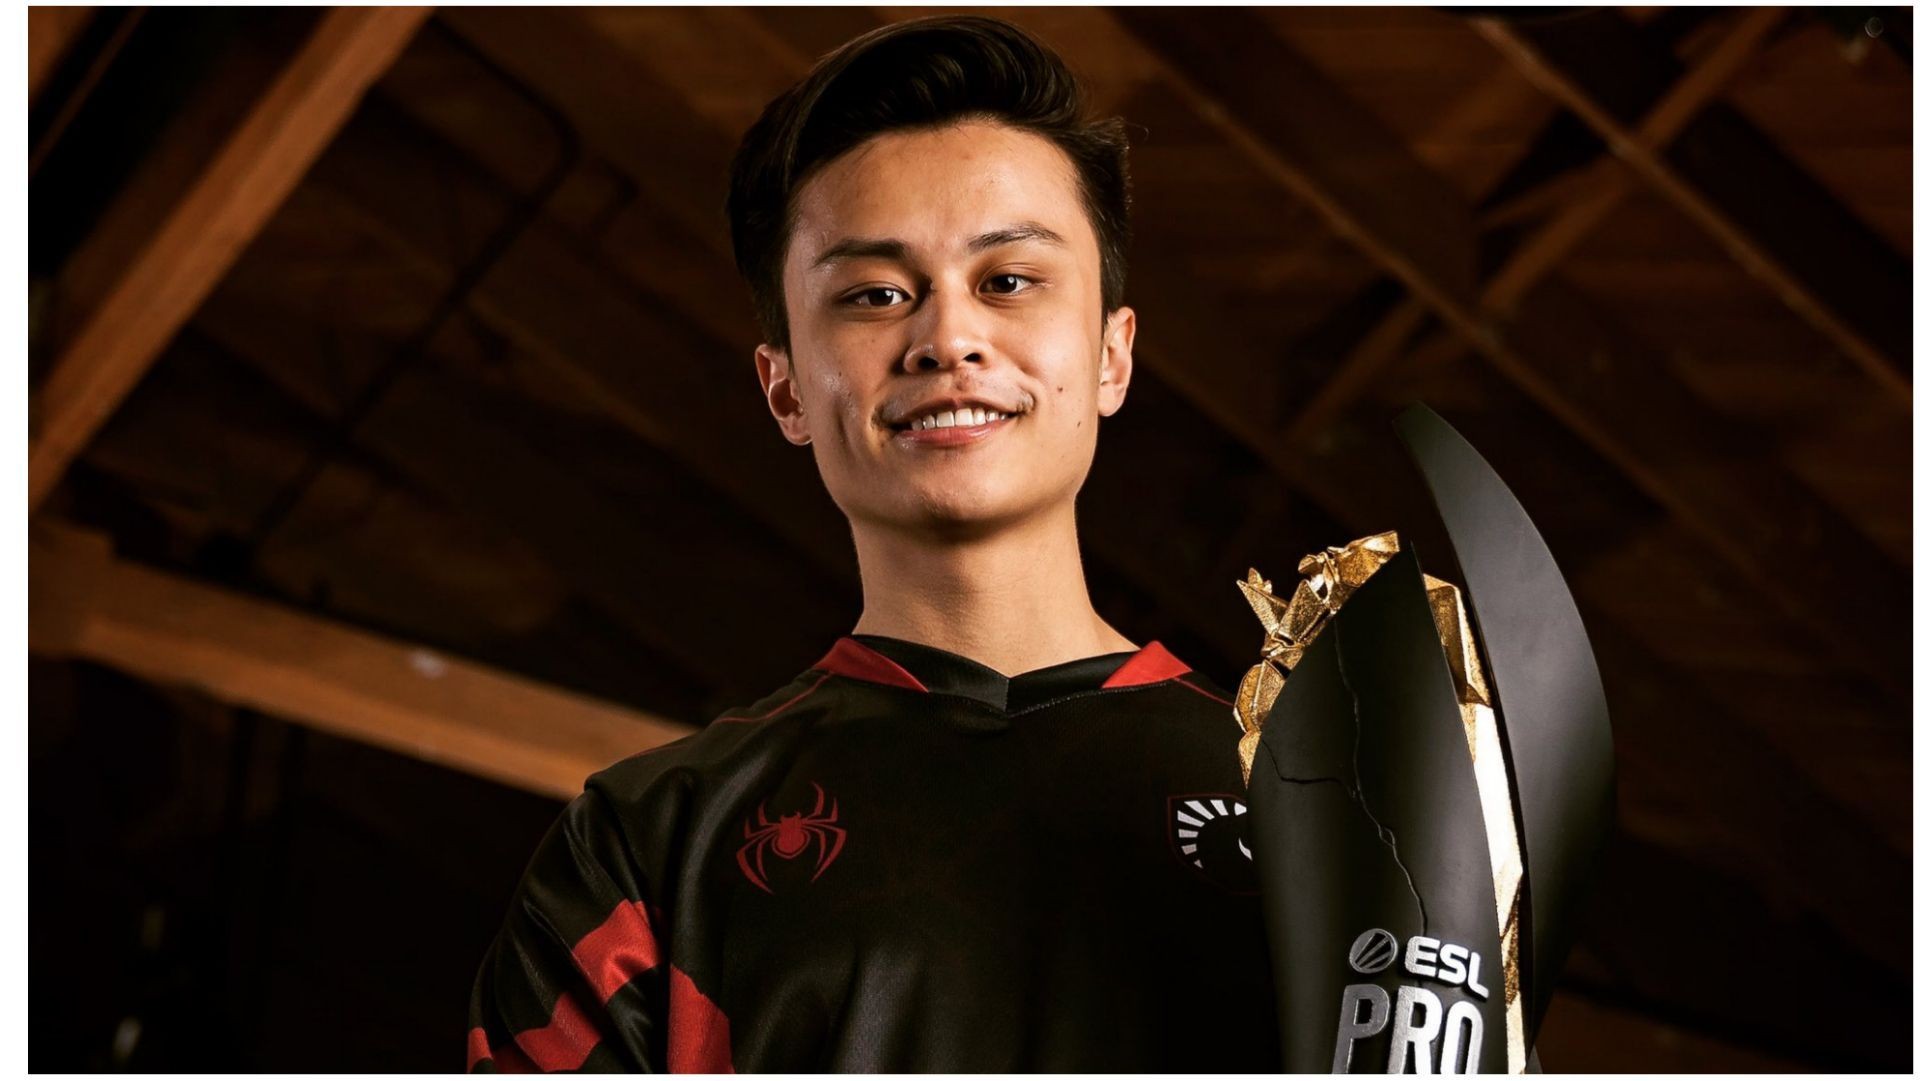 Stewie2K confirms his intentions of moving from CS:GO to Valorant - Image via Twitter